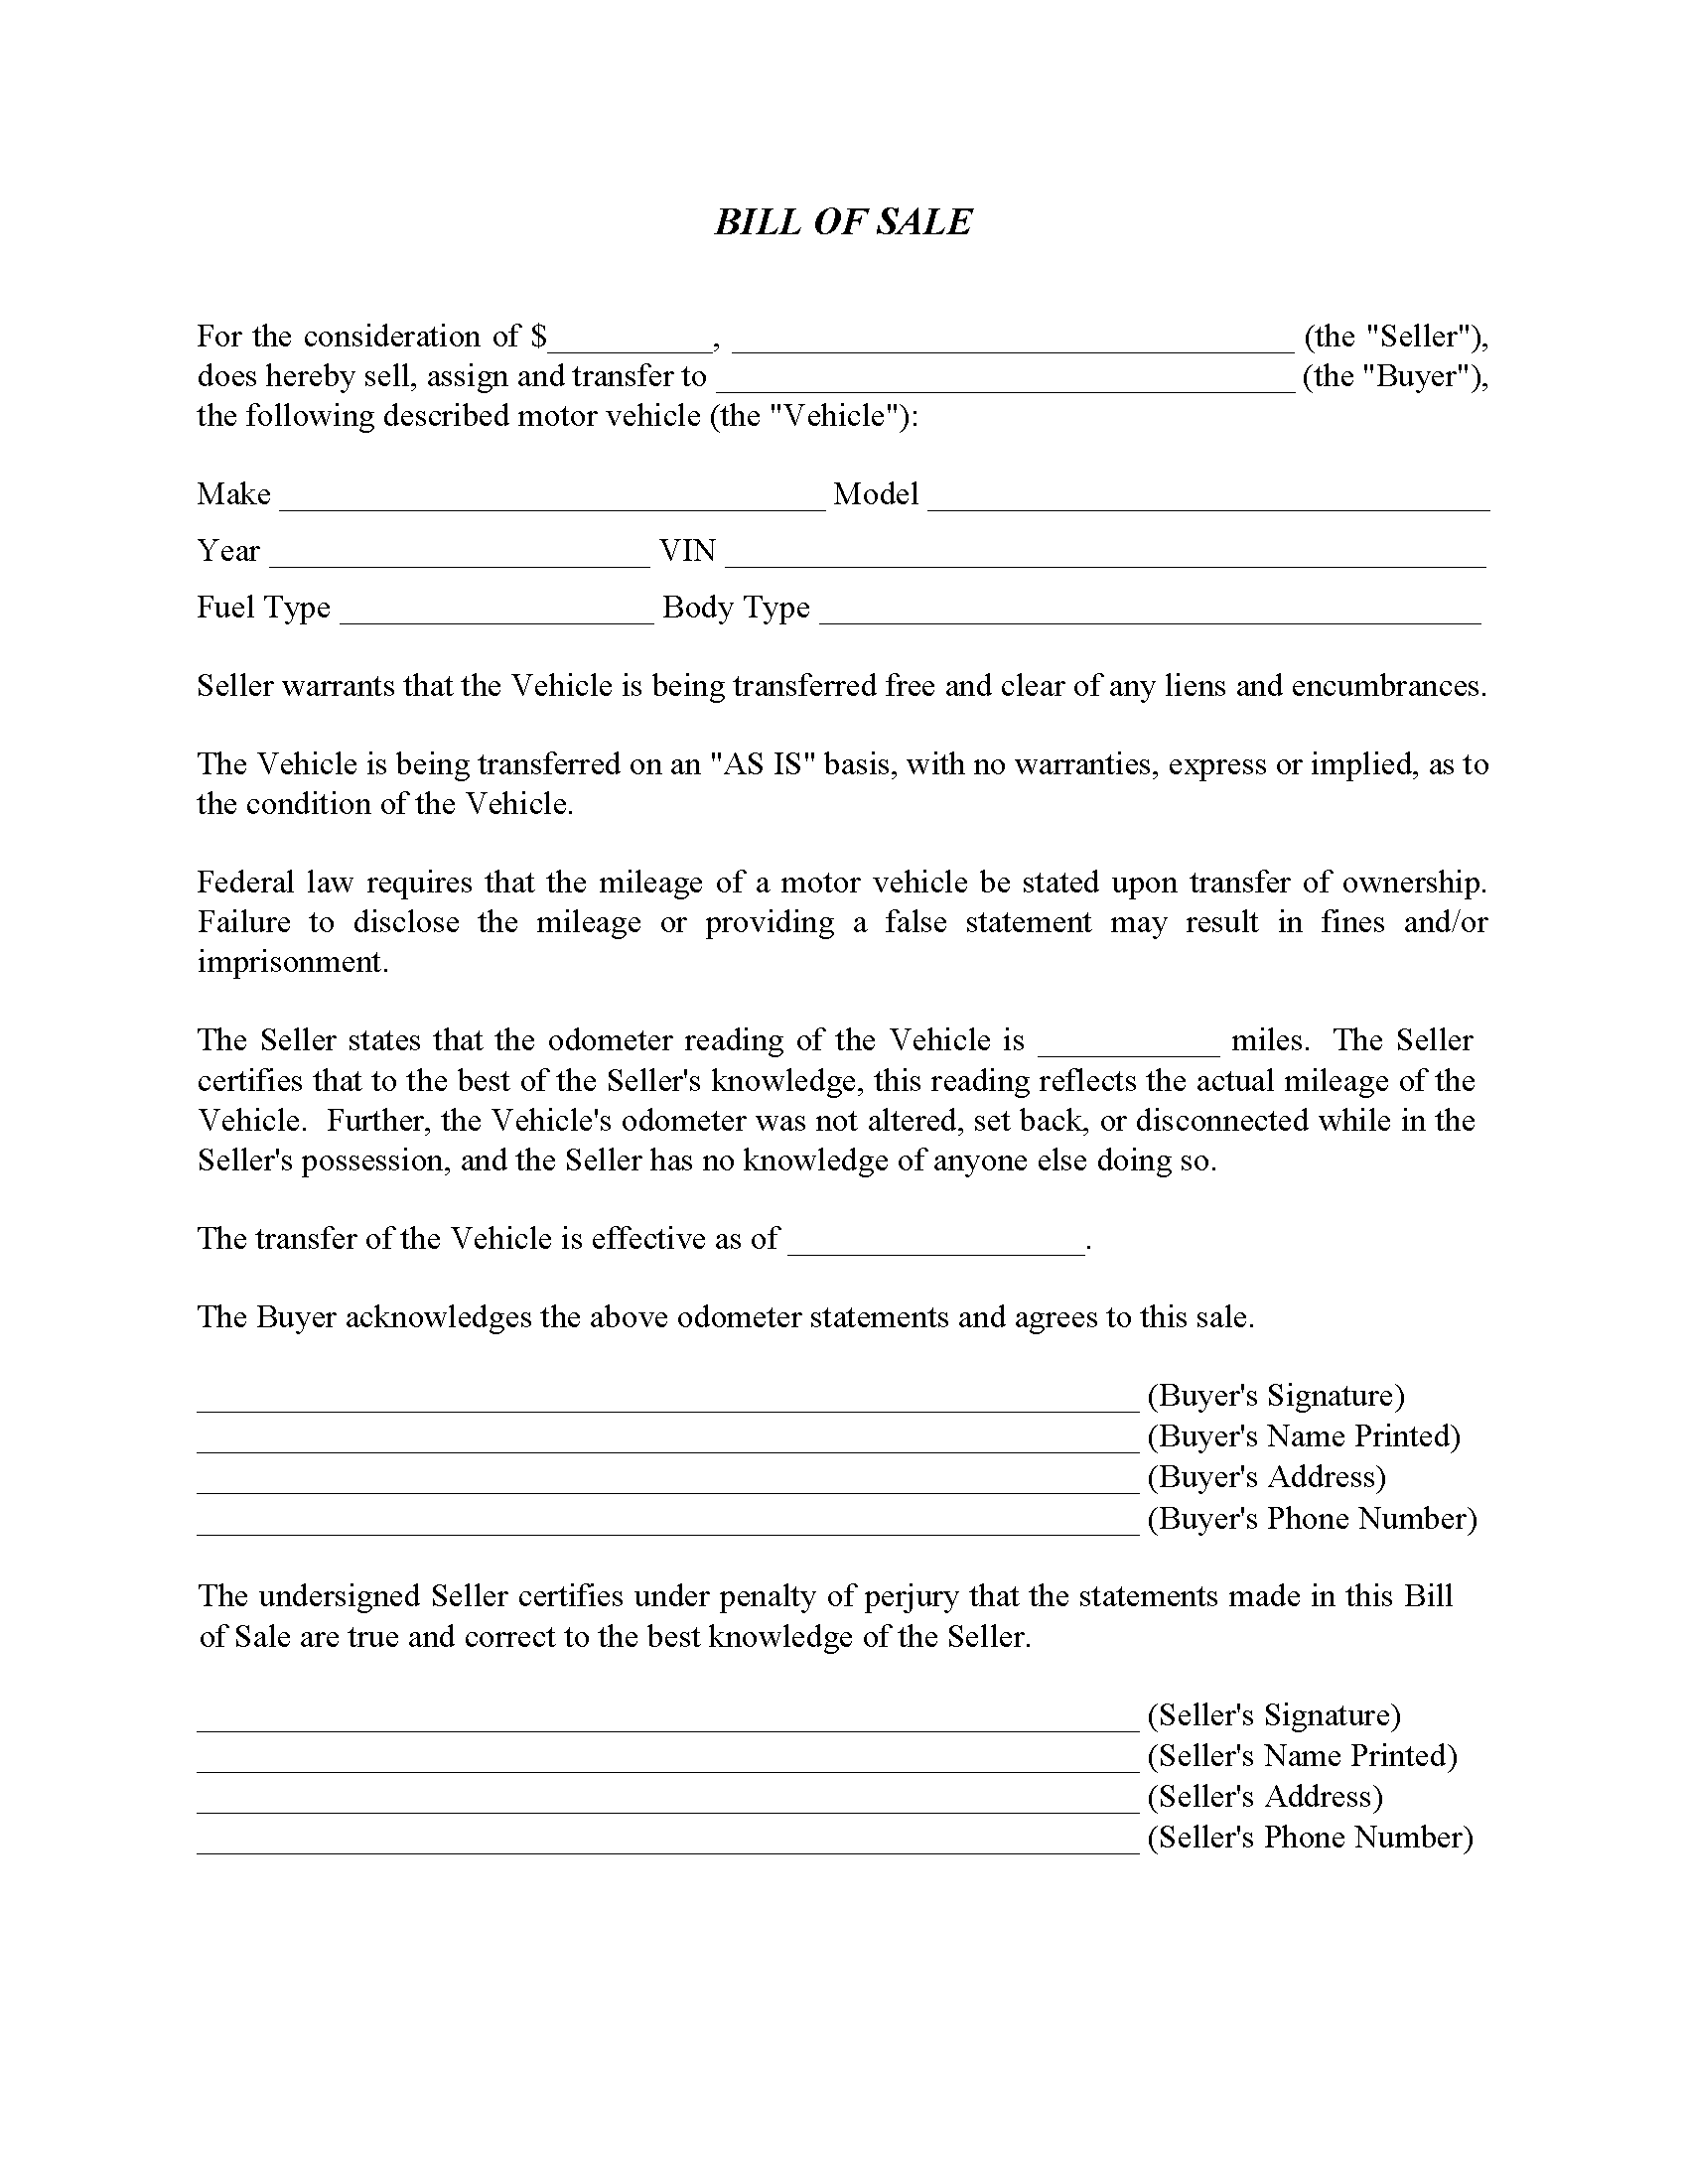 missouri-motor-vehicle-bill-of-sale-form-free-printable-legal-forms